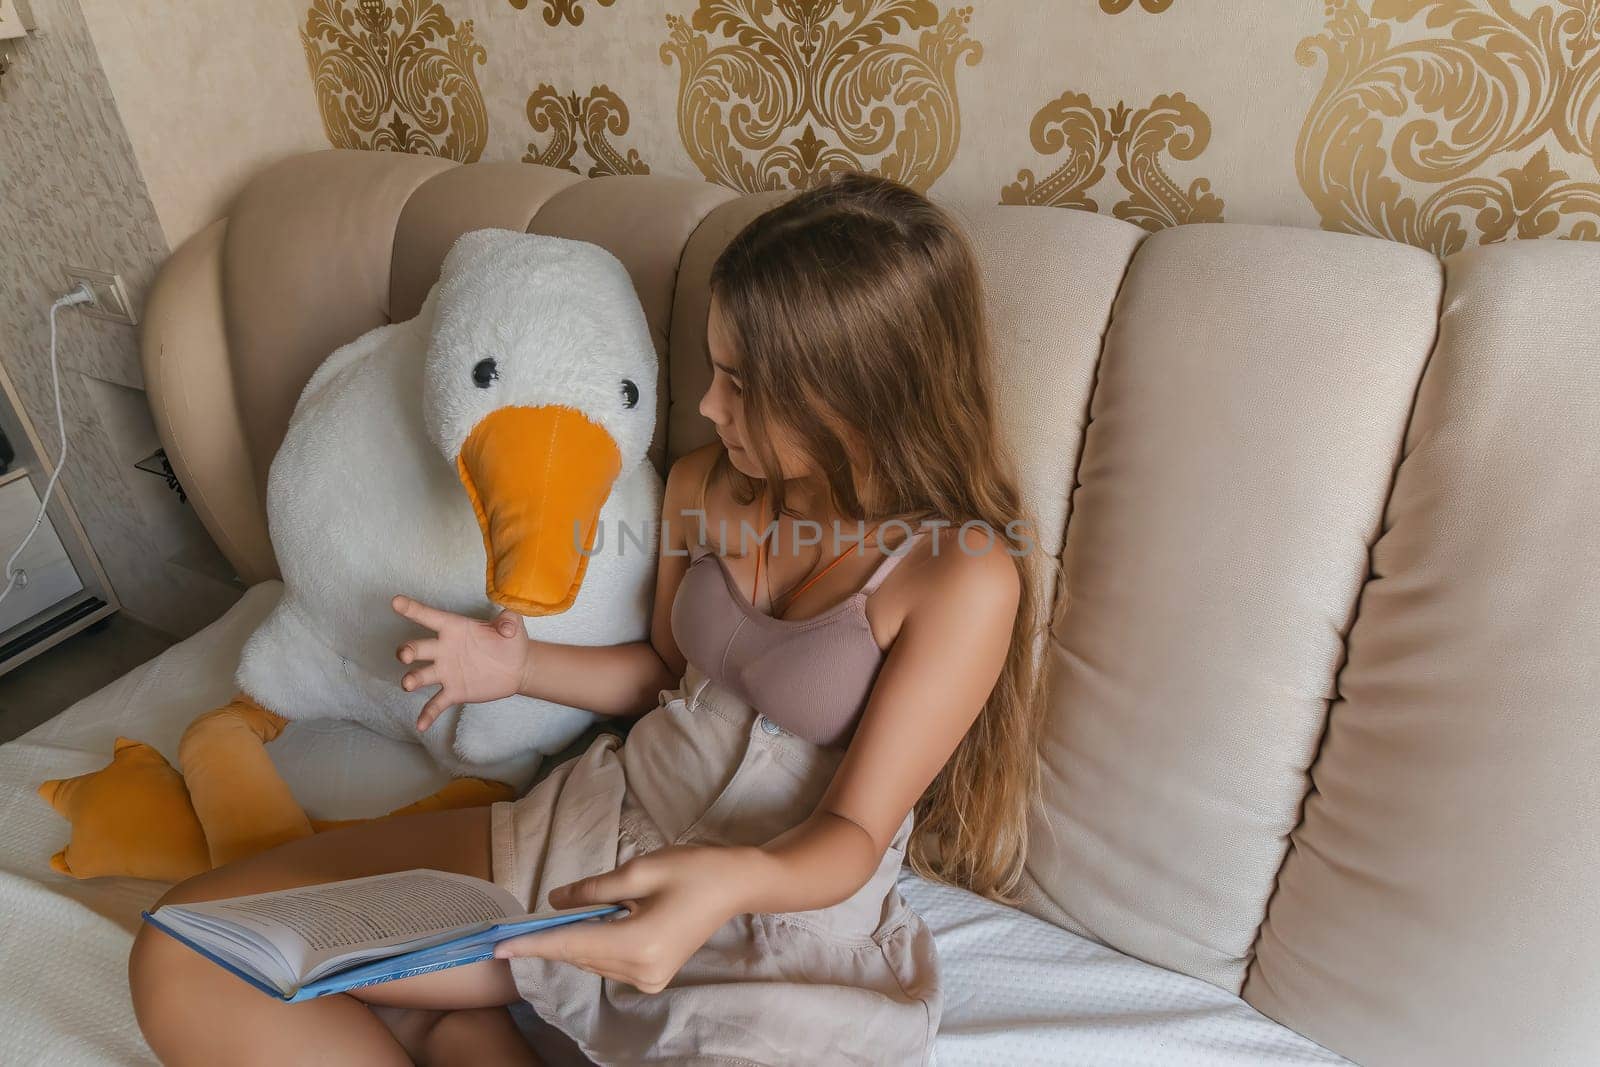 A girl is reading a book while sitting on a bed with a stuffed duck. The room has a gold and white color scheme, and there are two lamps in the room